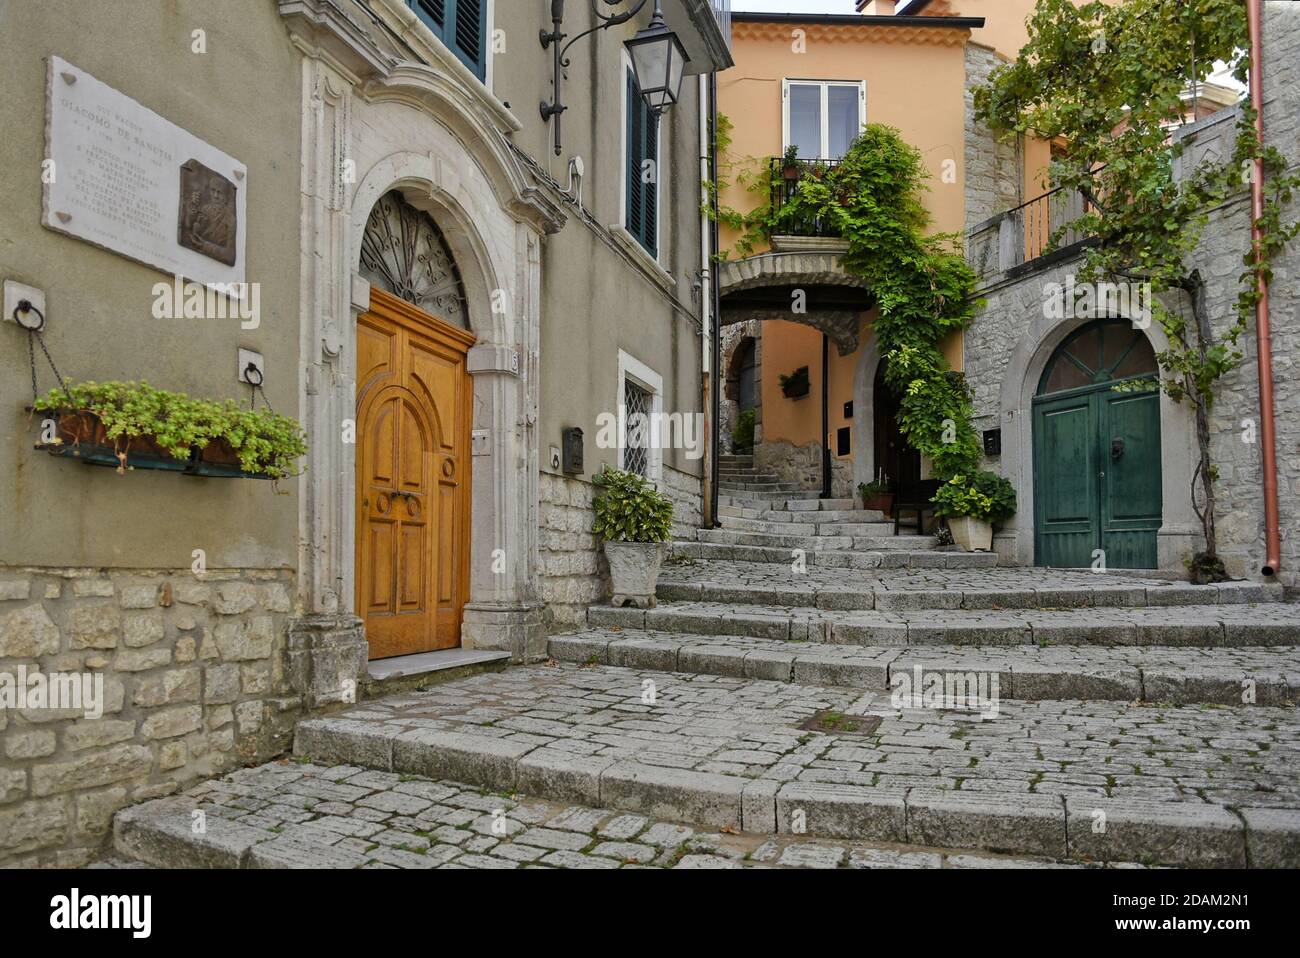 A narrow street among the old houses of Ferrazzano, a medieval village in the Molise region, Italy. Stock Photo